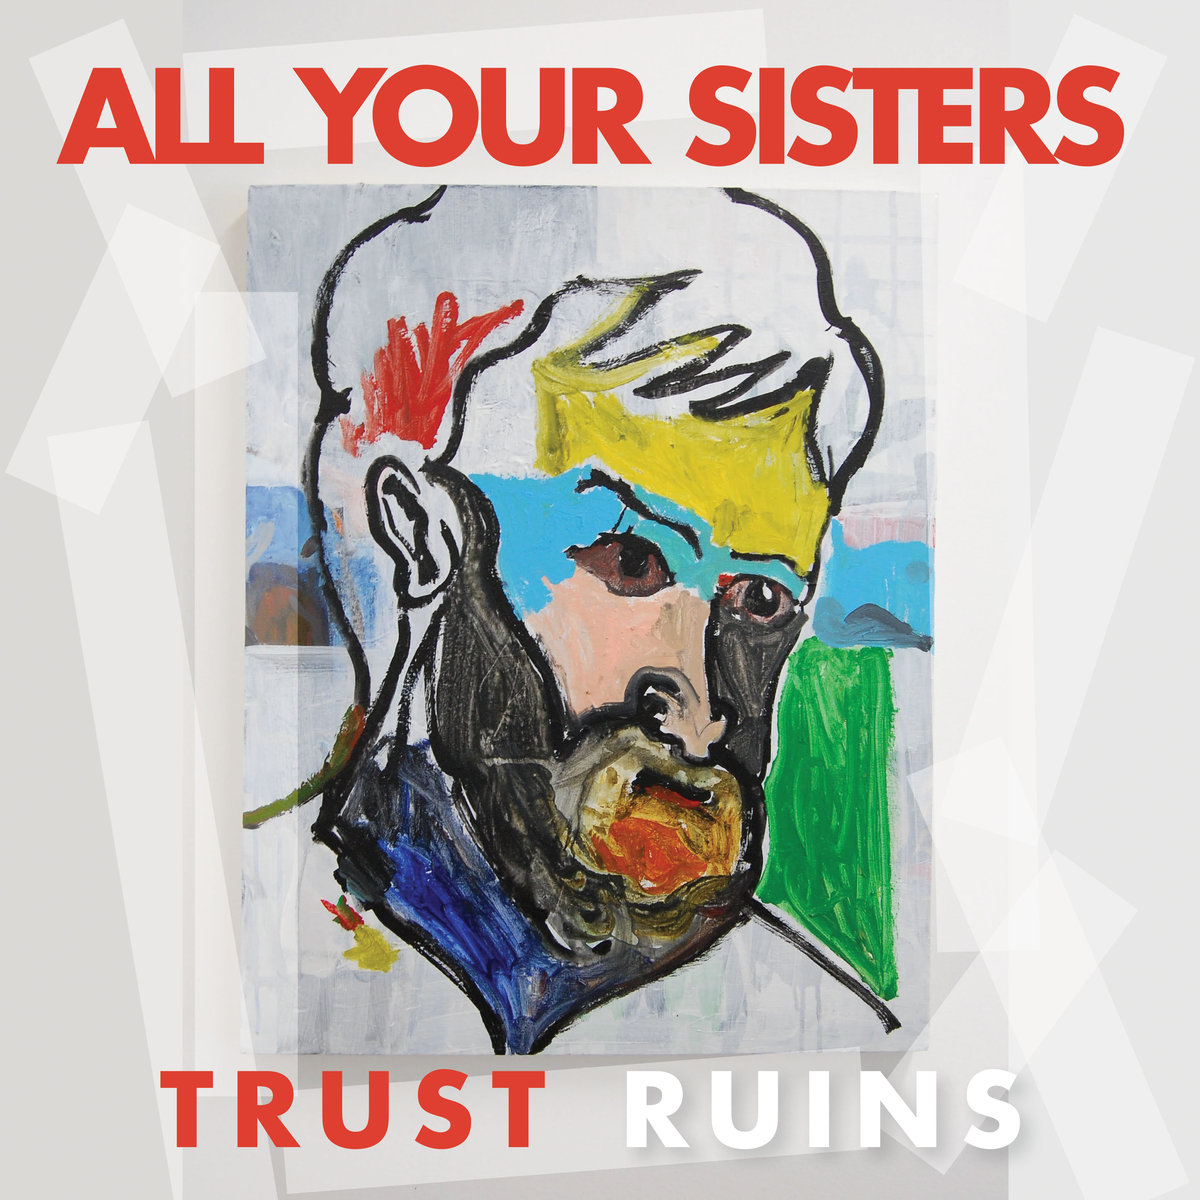 All Your Sisters, “Trust Ruins”